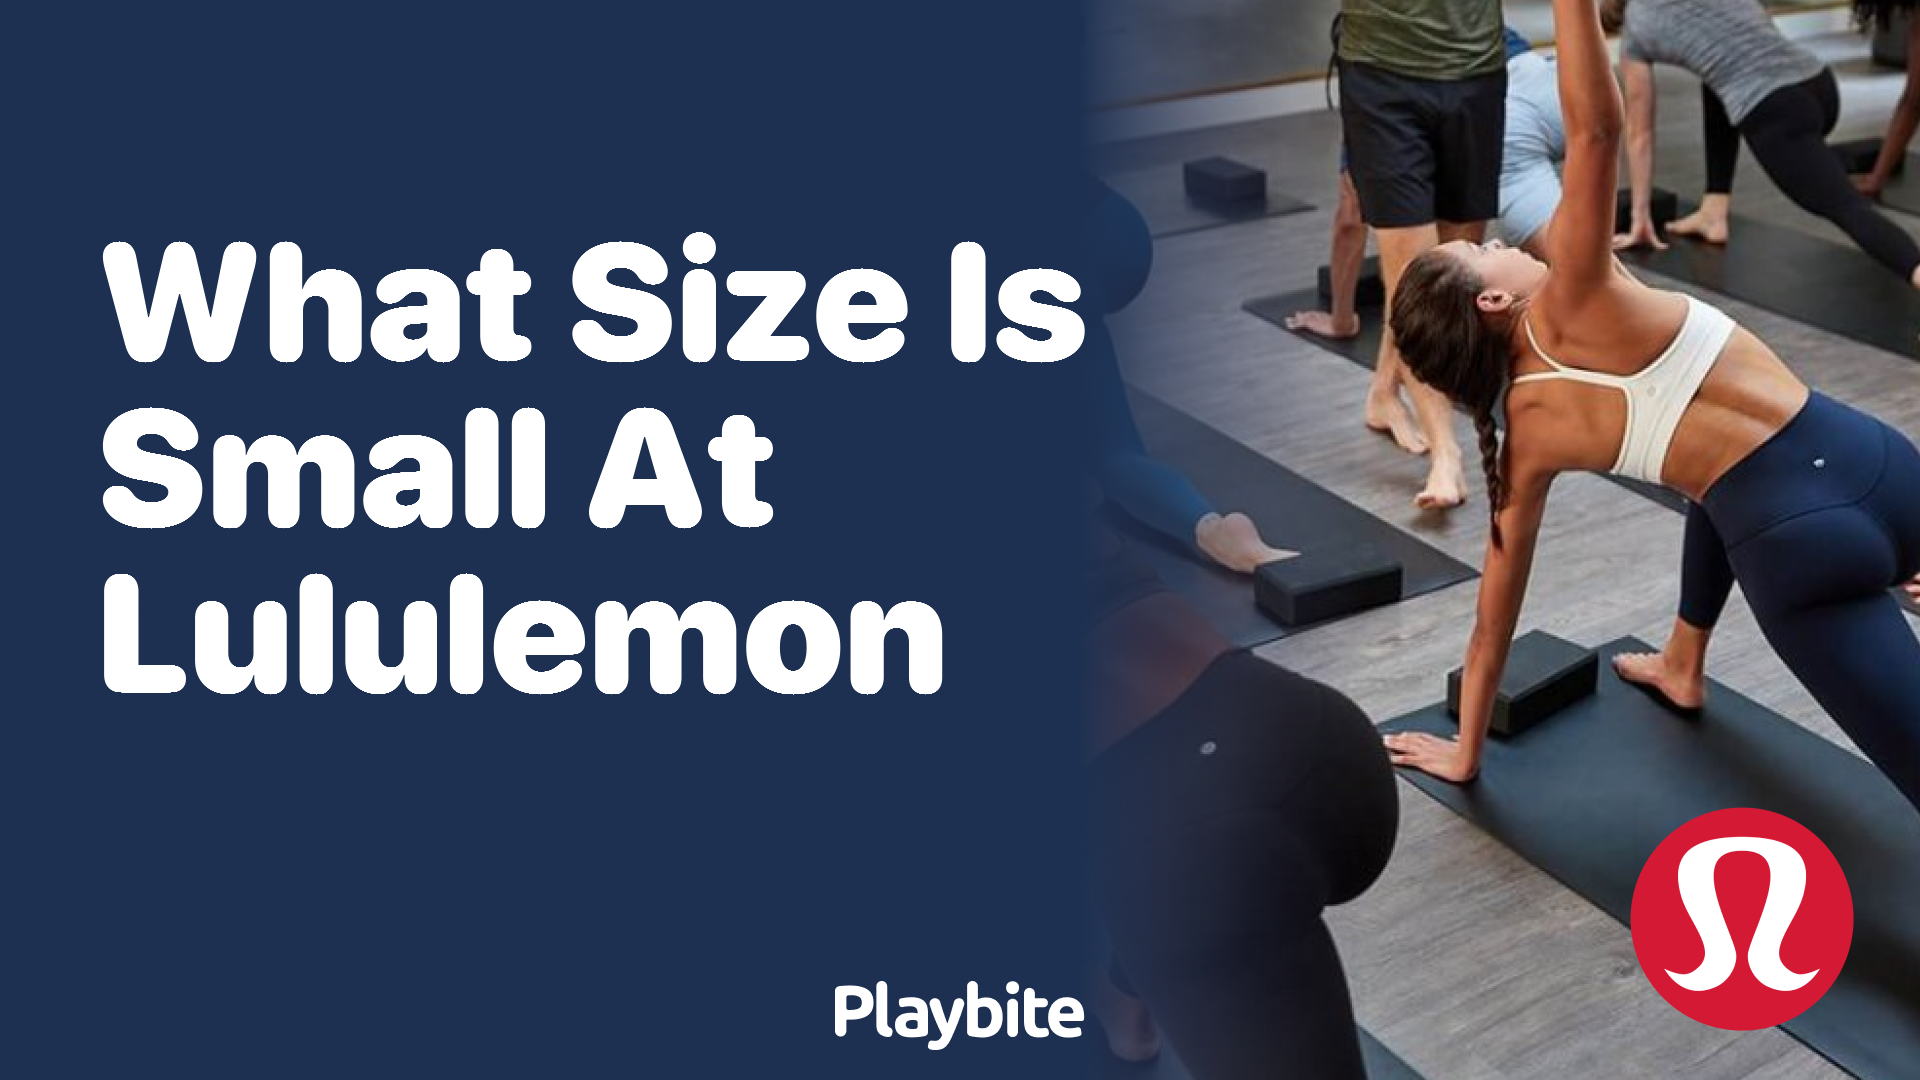 How Small is Lululemon Size 0? - Playbite